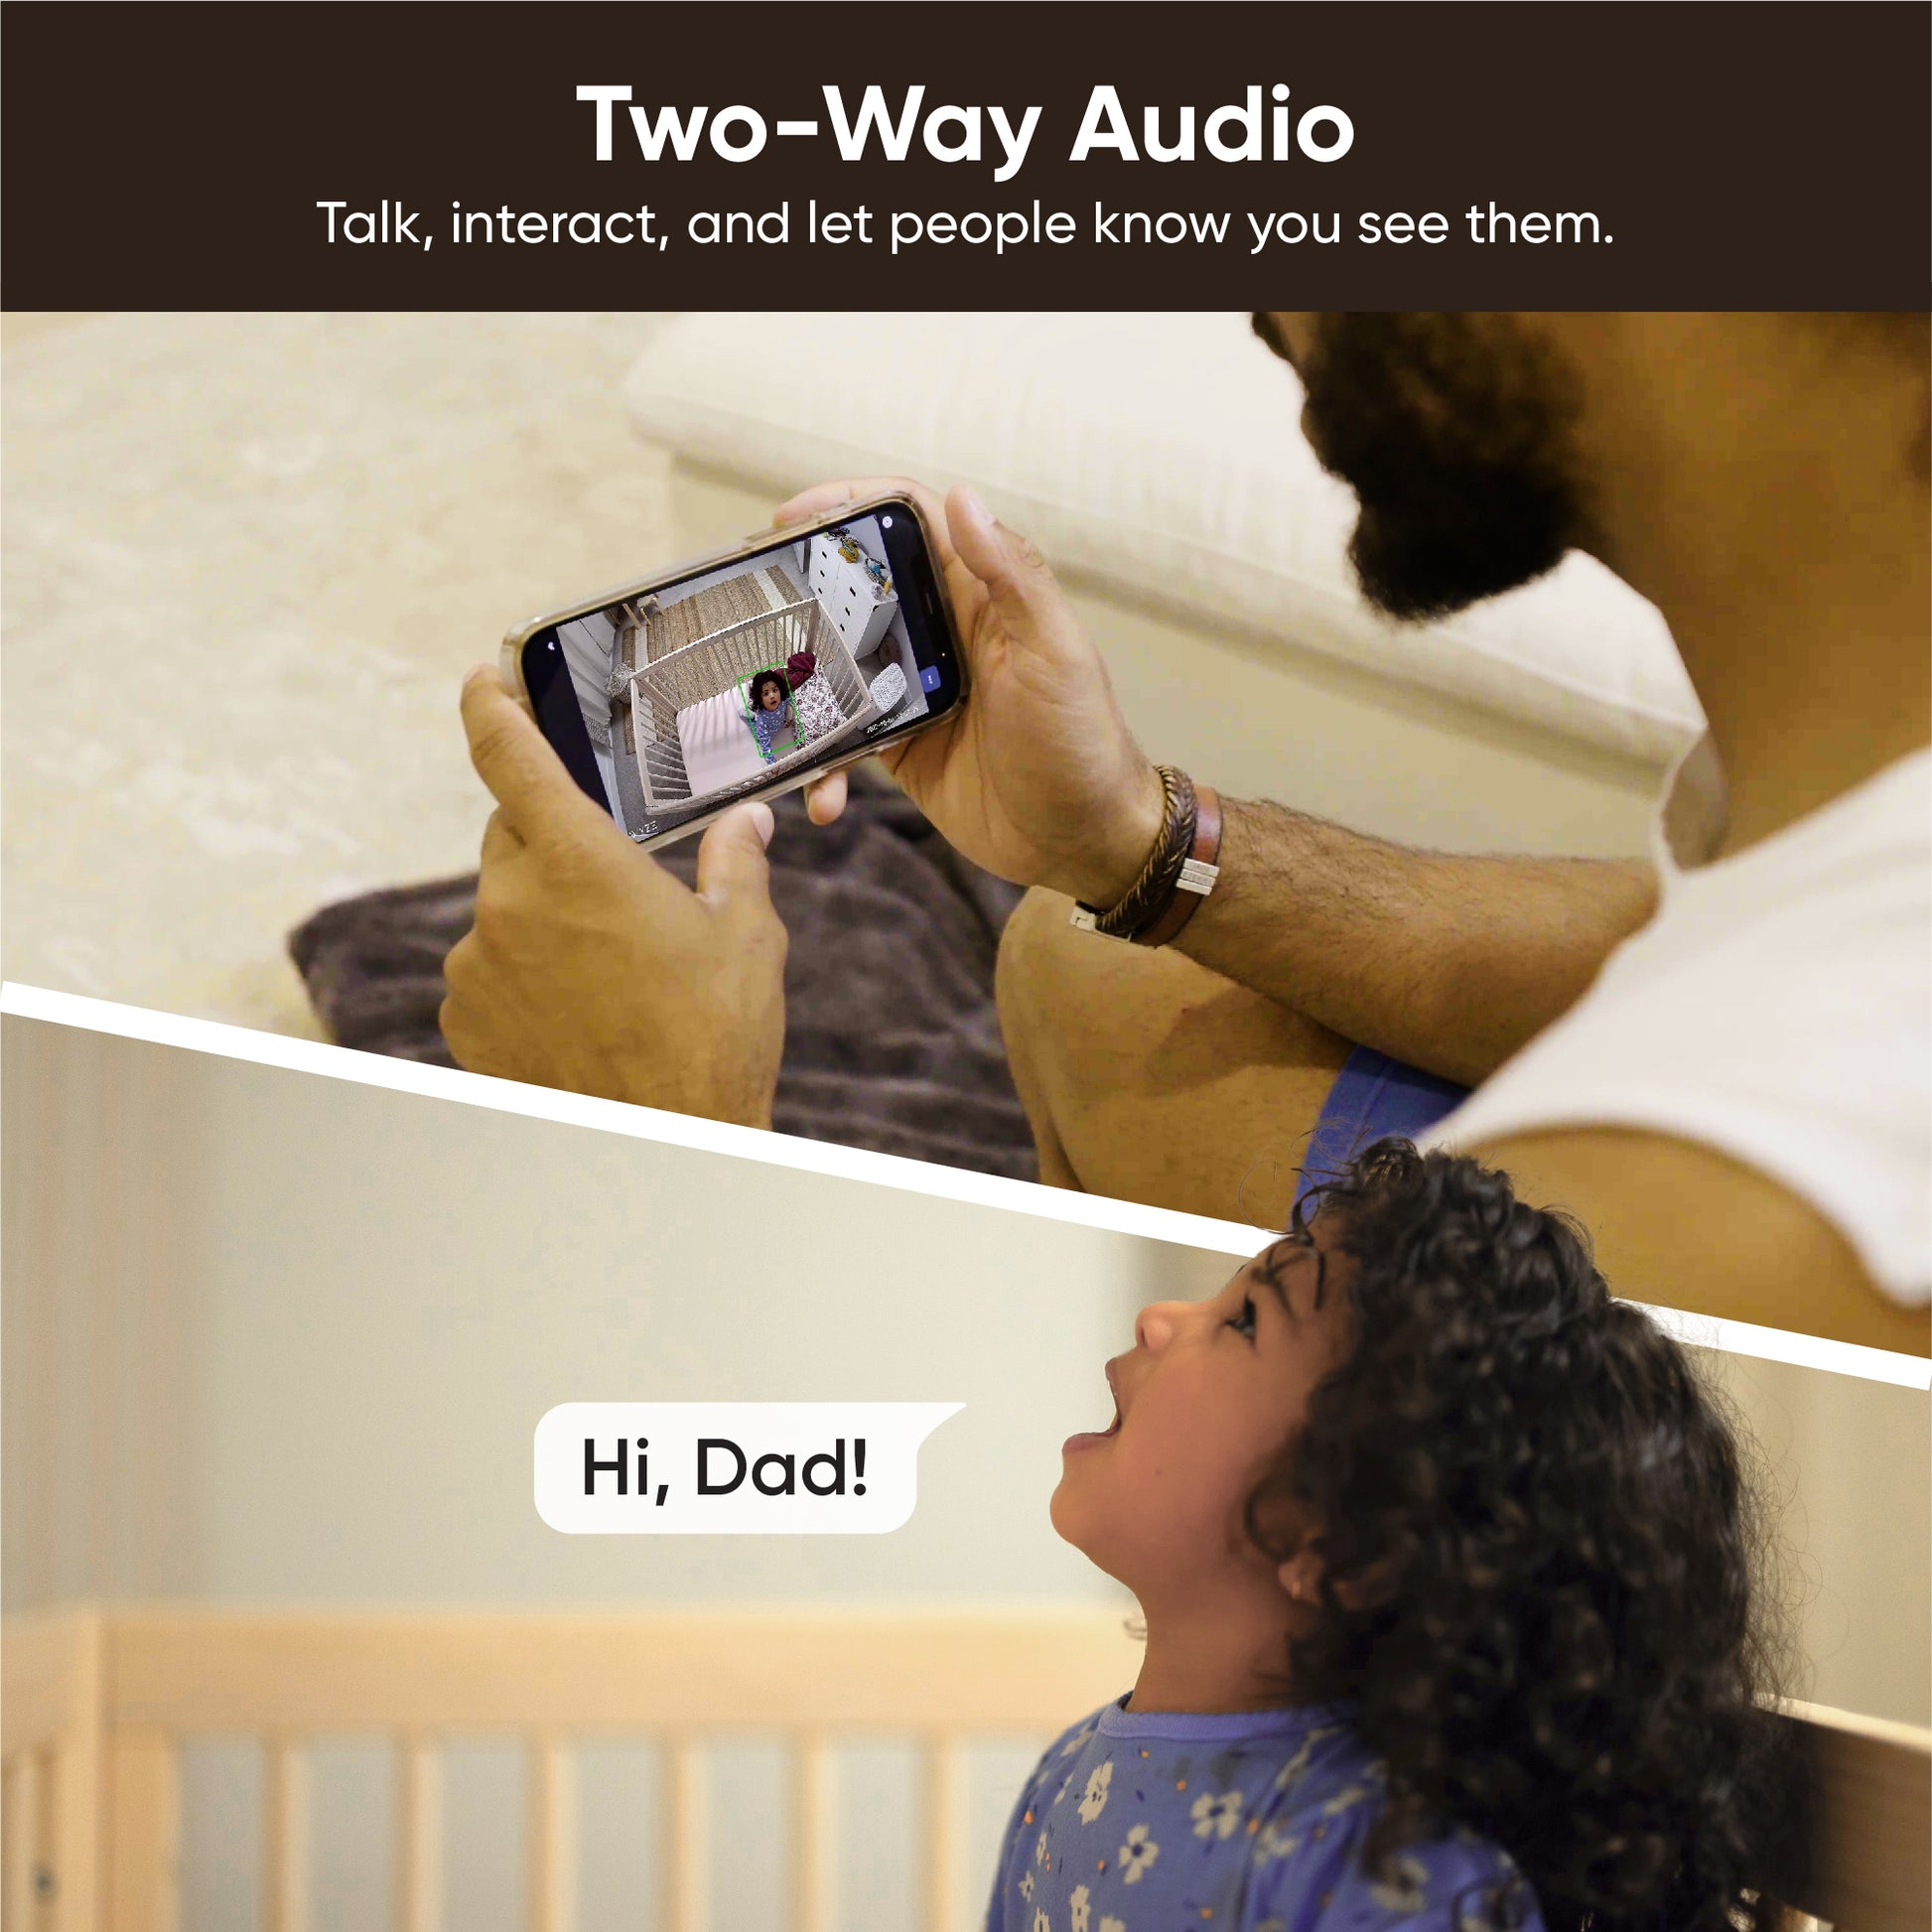 Dad looking at kid over Wyze app on a smartphone. Text overlay "Two-Way Audio."